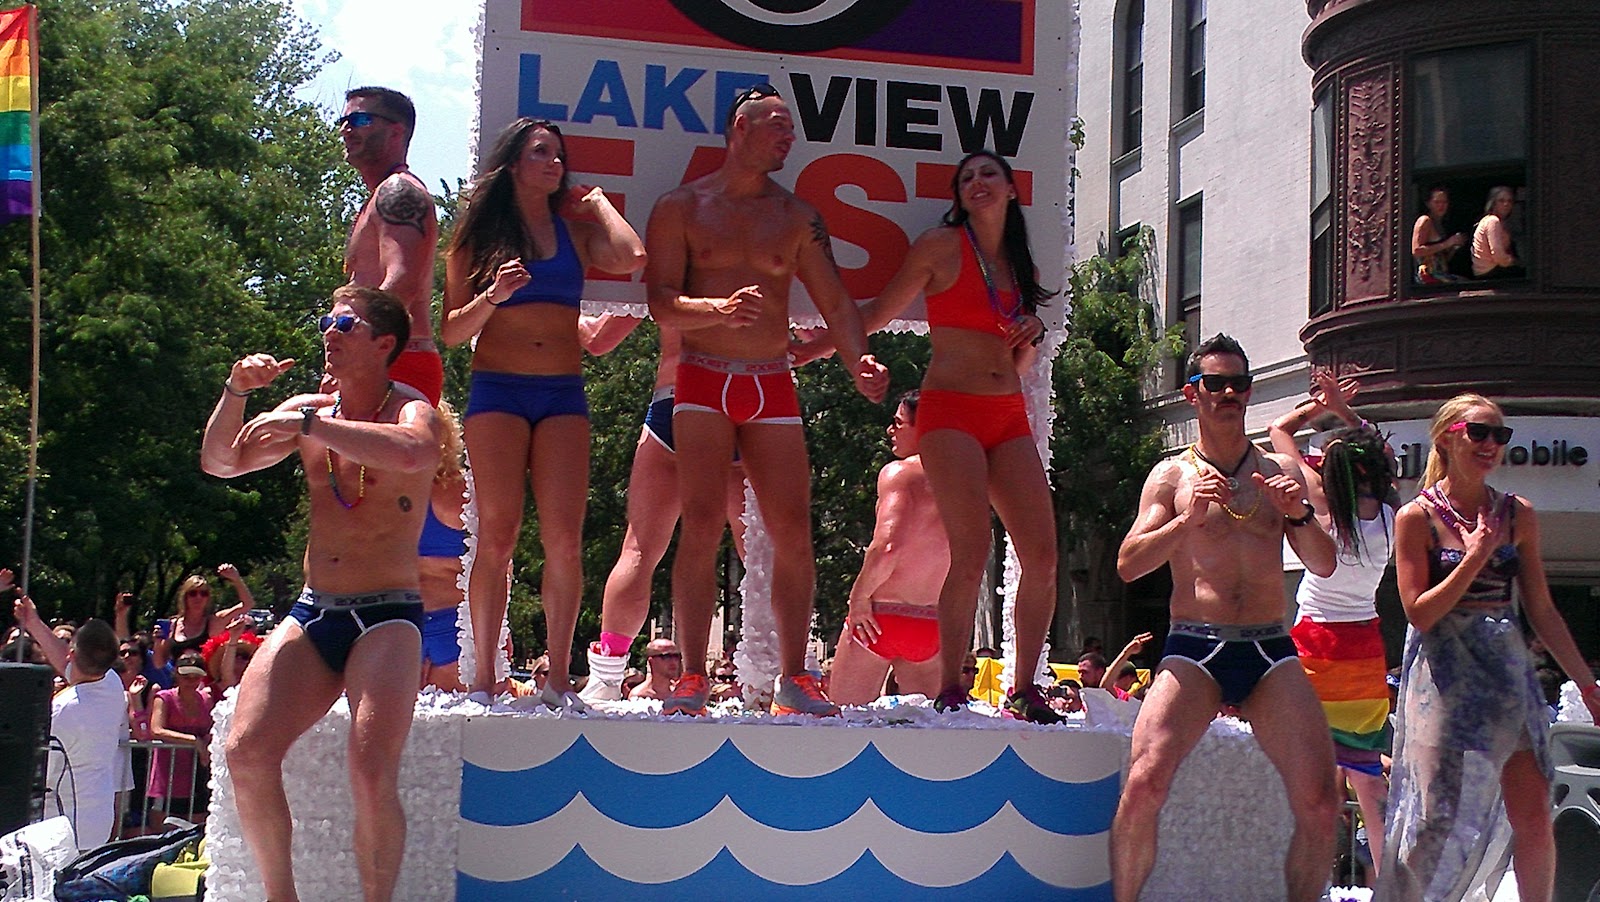 THE ADRIAN SPOT - Thoughts, Views, Sights: CHICAGO GAY PRIDE 20121600 x 902